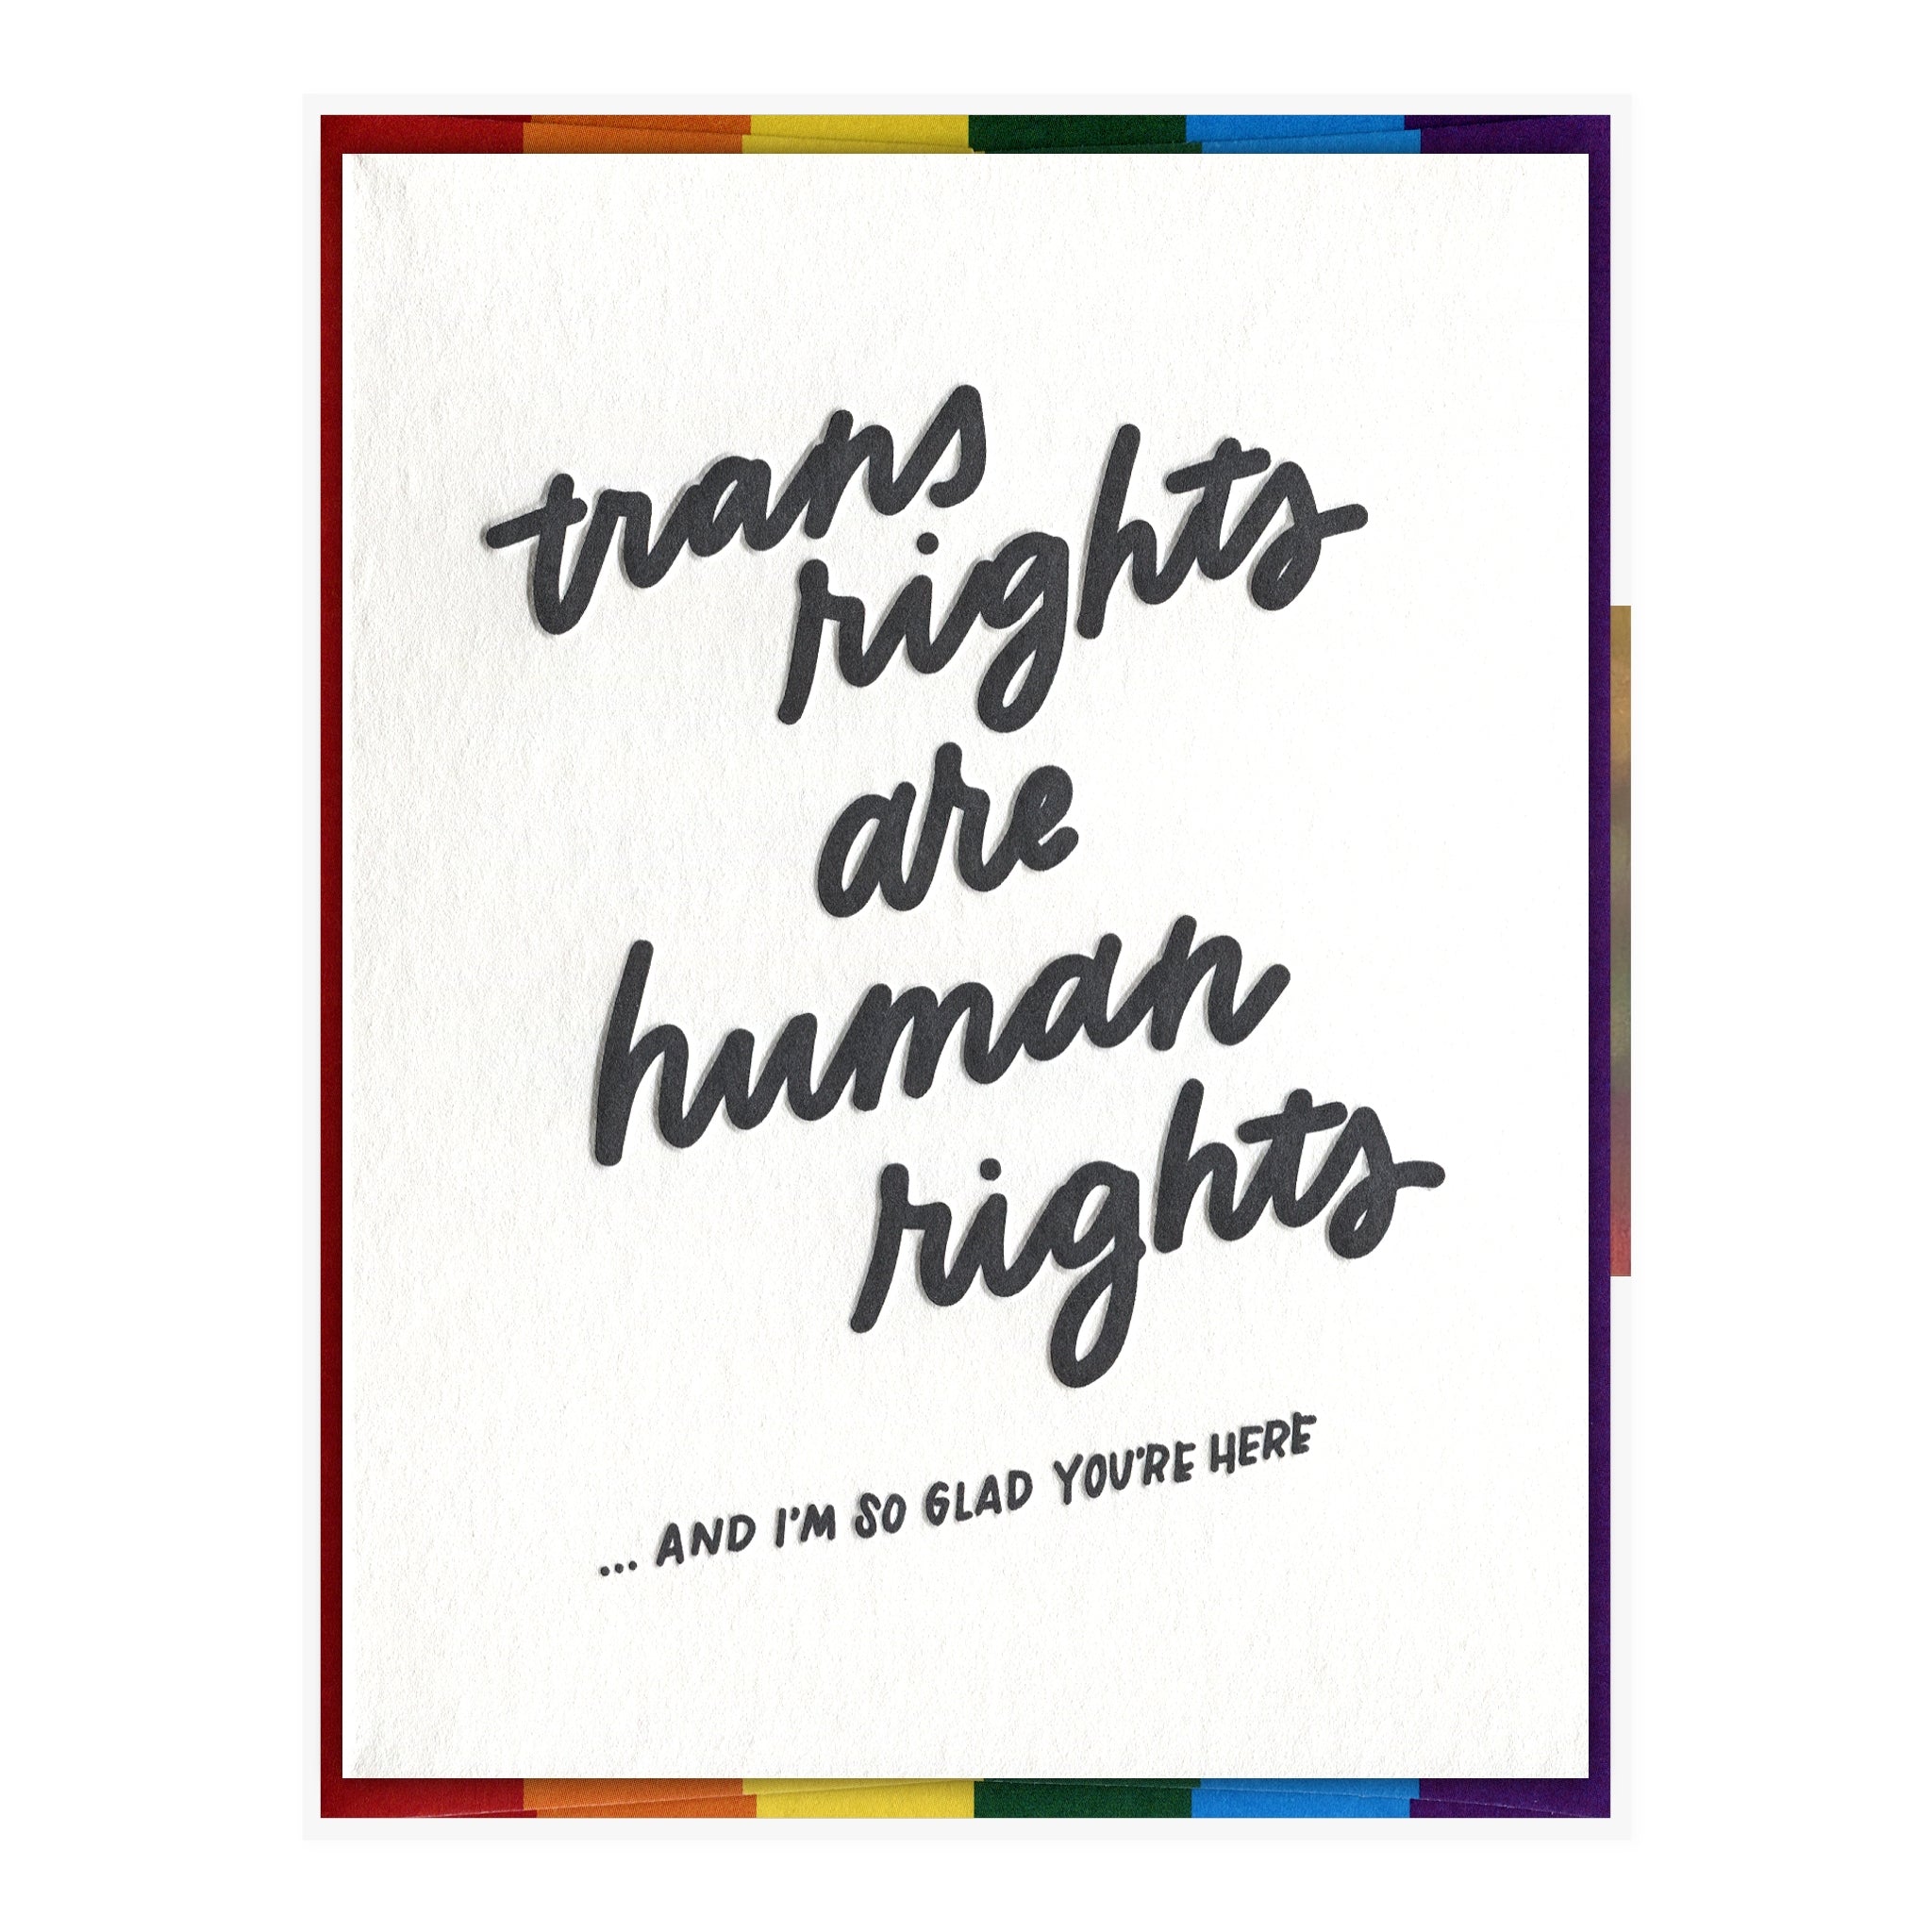 White card with blue script text saying, “Trans Rights Are Human Rights….And I’m So Glad You’re Here”. A rainbow striped envelope is included.